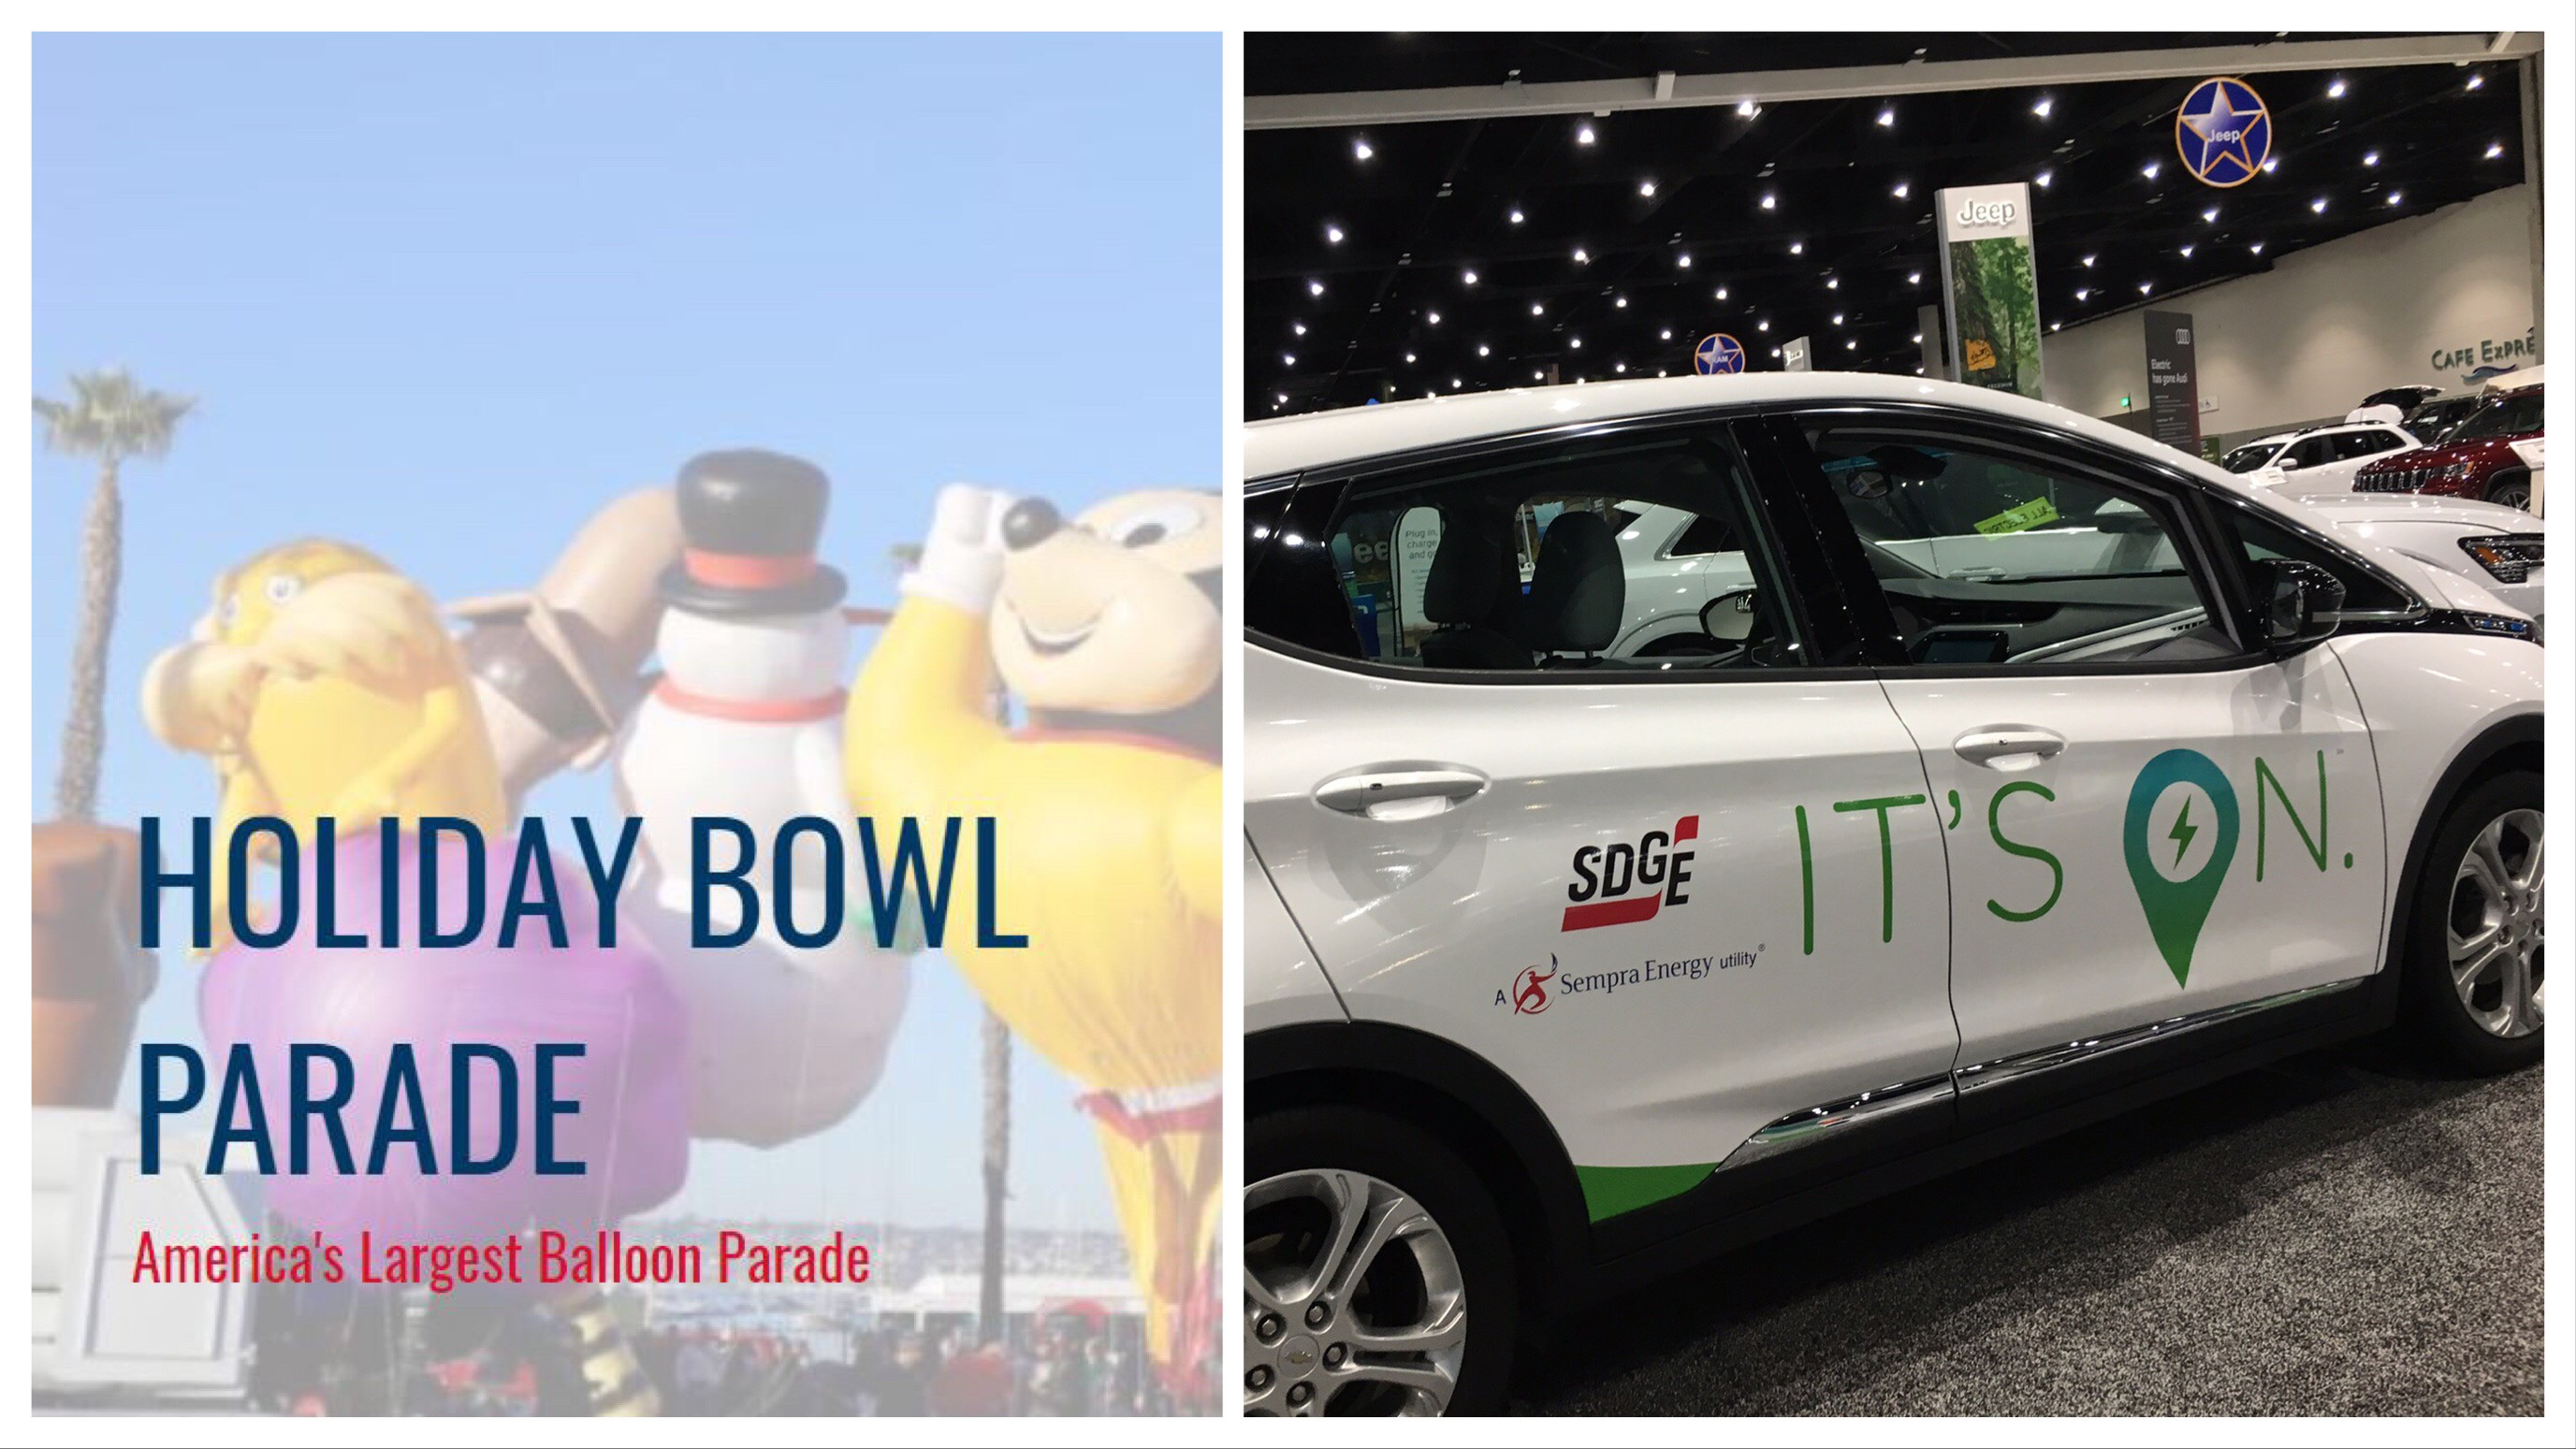 See You at the Holiday Bowl Parade and Game! SDGE San Diego Gas